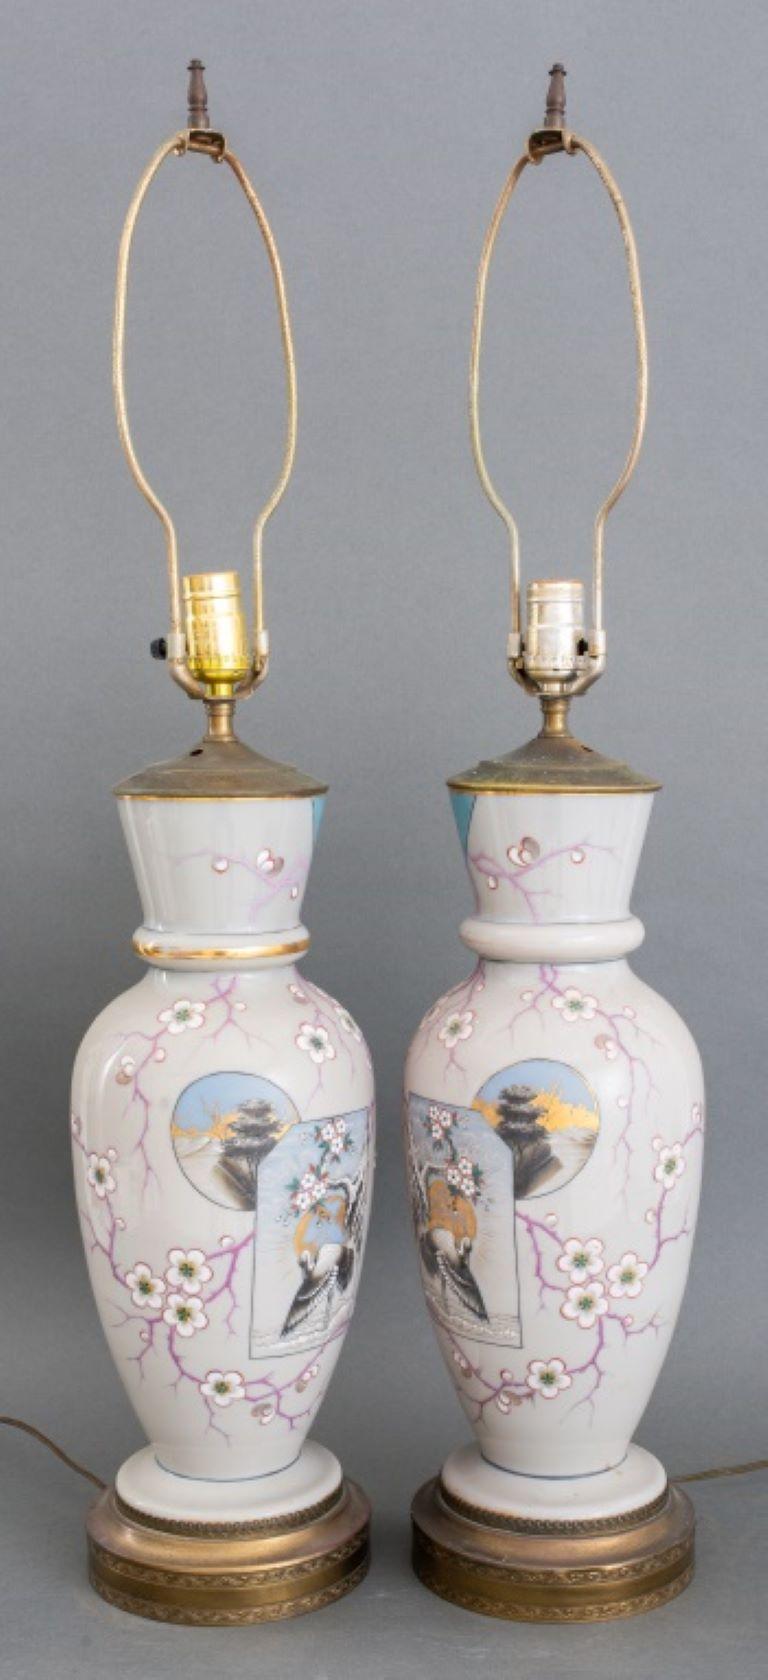 Pair of aesthetic movement Japanesesque ceramic porcelain baluster vases hand-painted with cherry blossom and heron motifs, now mounted as table lamps and raised on gilt metal bases. 